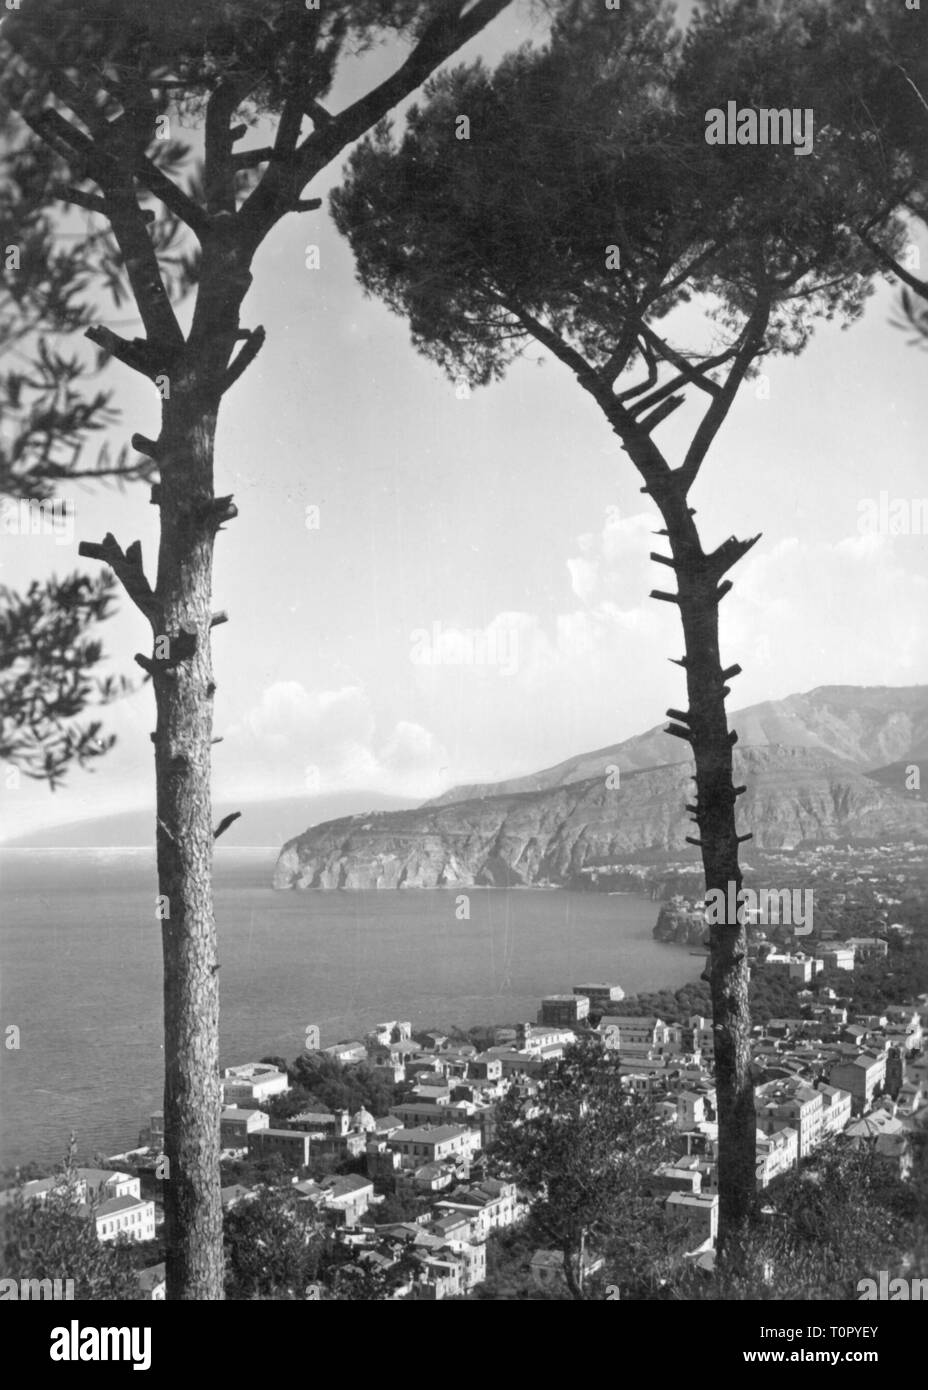 Geographie/Reisen, Italien, Sorrento, Stadtblick, Postkarte, Poststempel 2.4.1940, Additional-Rights - Clearance-Info - Not-Available Stockfoto